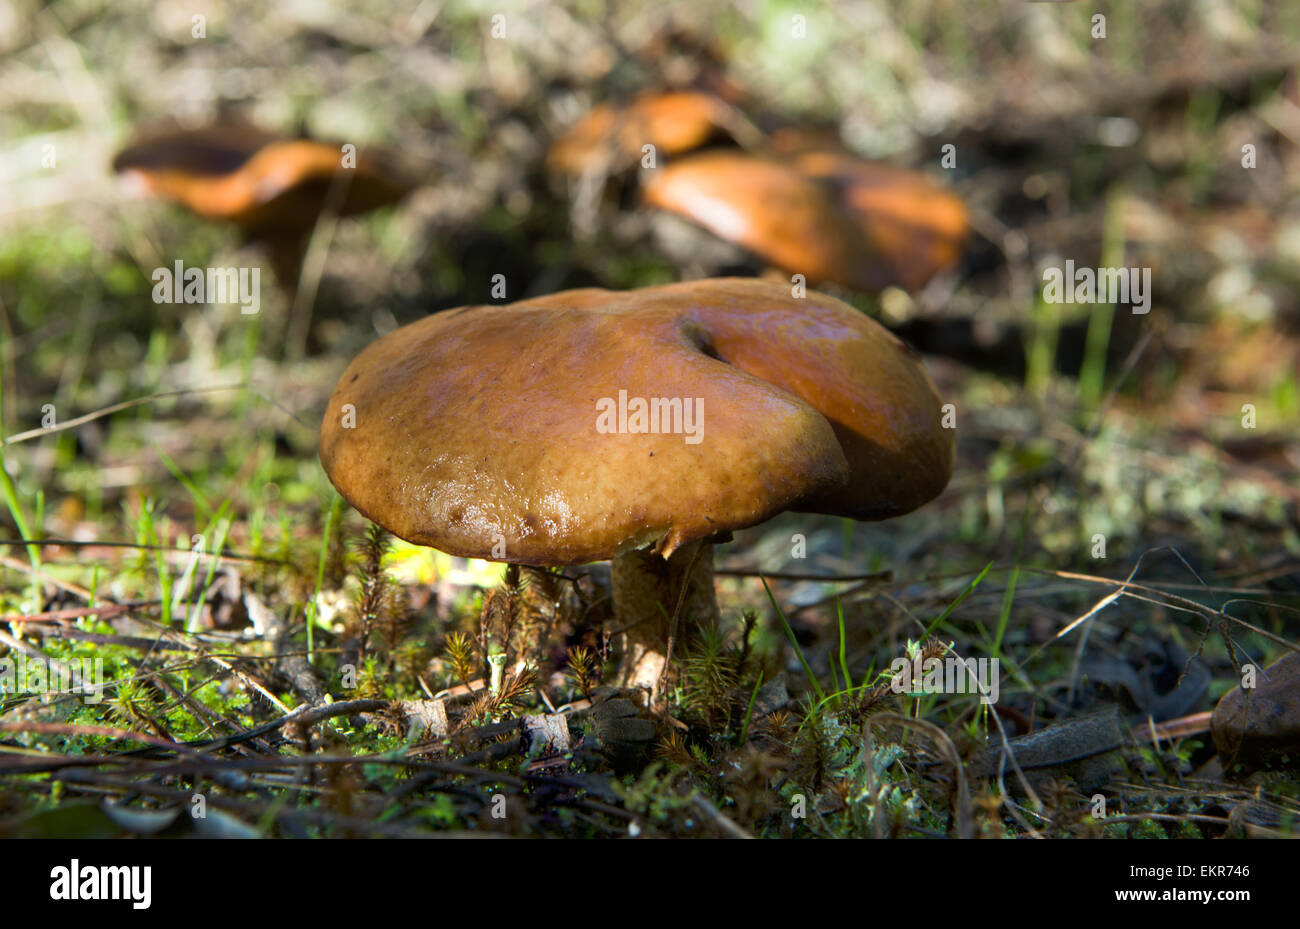 Suillus bellinii is a pored mushroom of the genus Suillus in the Suillaceae family. It is found in coastal pine forests of south Stock Photo